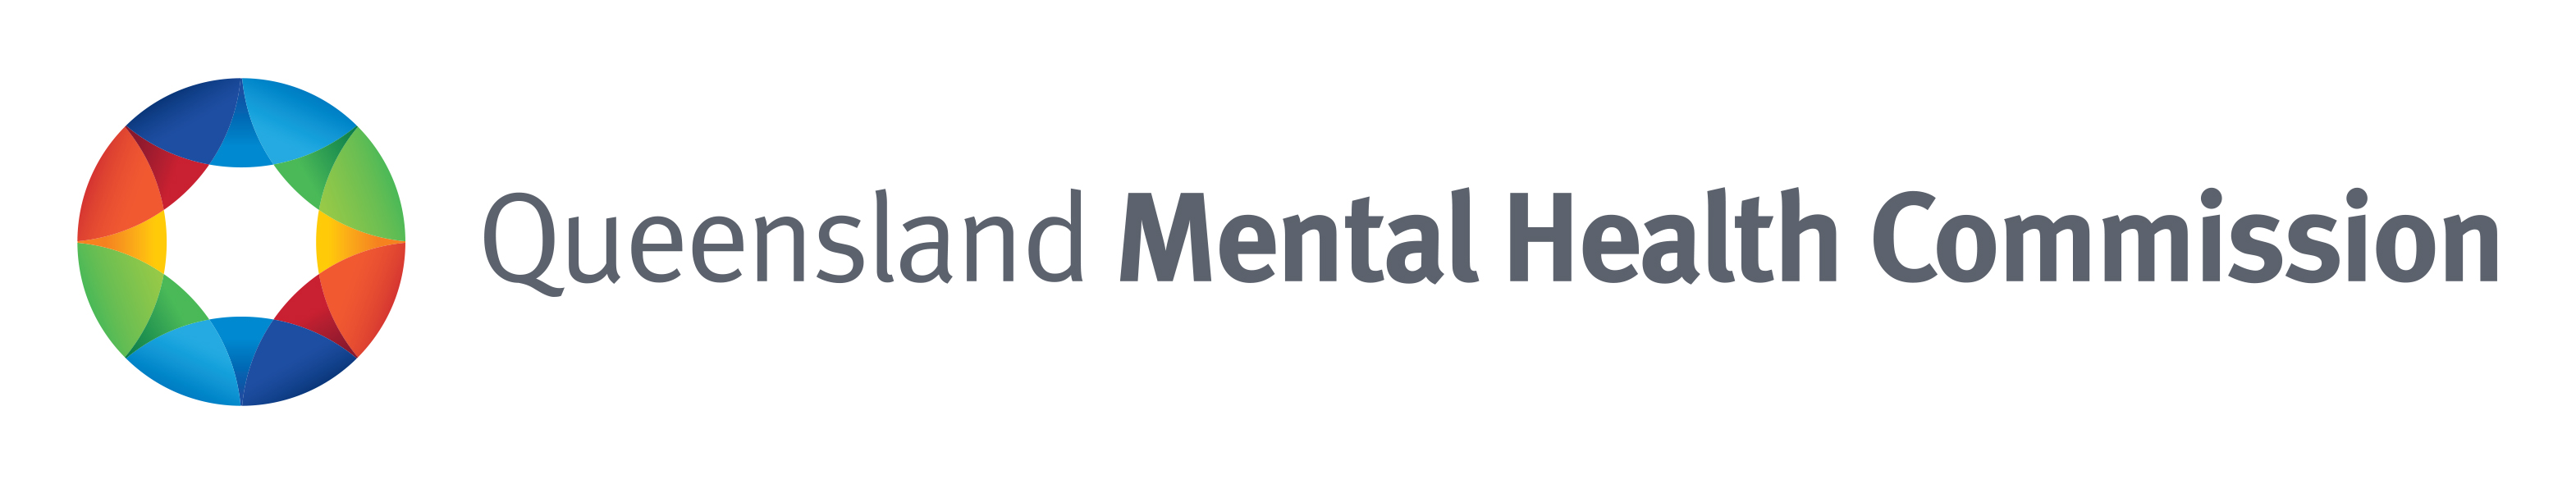 The Queensland Mental Health Commission logo - a rainbow circle